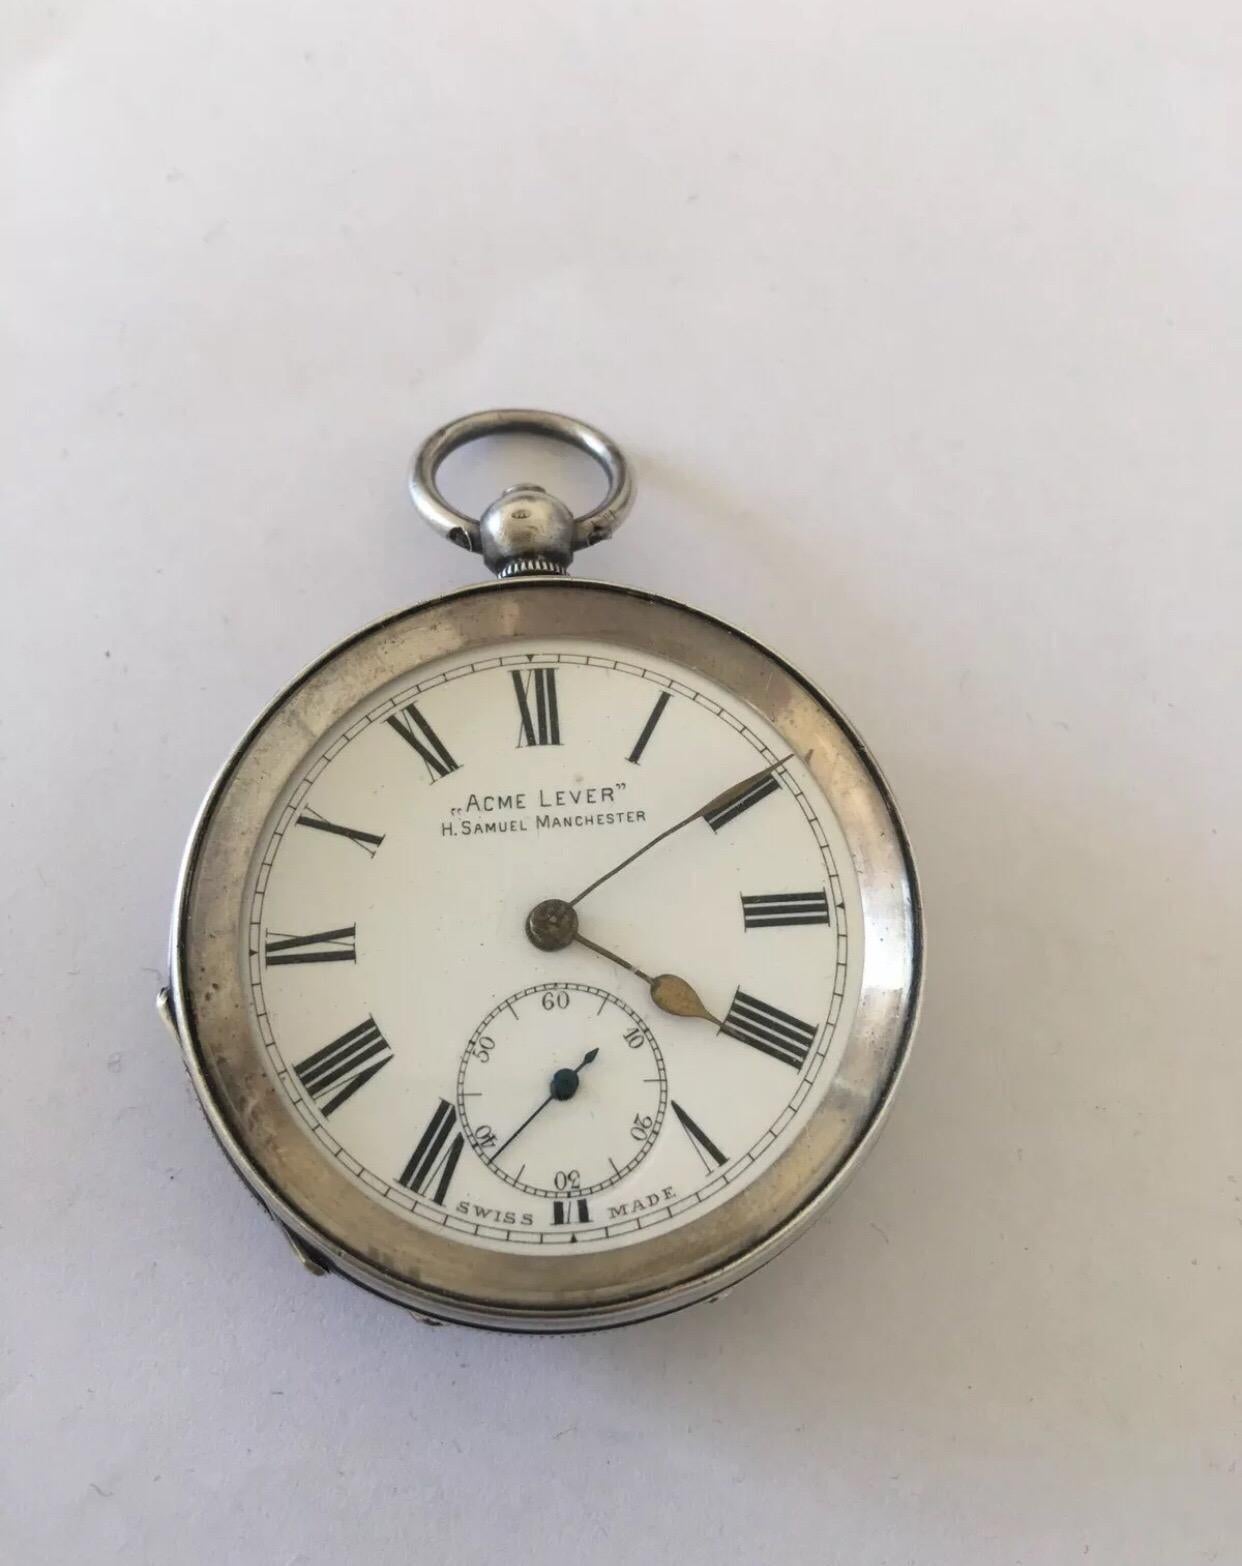 Antique Silver Swiss Made Pocket Watch Signed H. Samuel Manchester Acme Lever 3